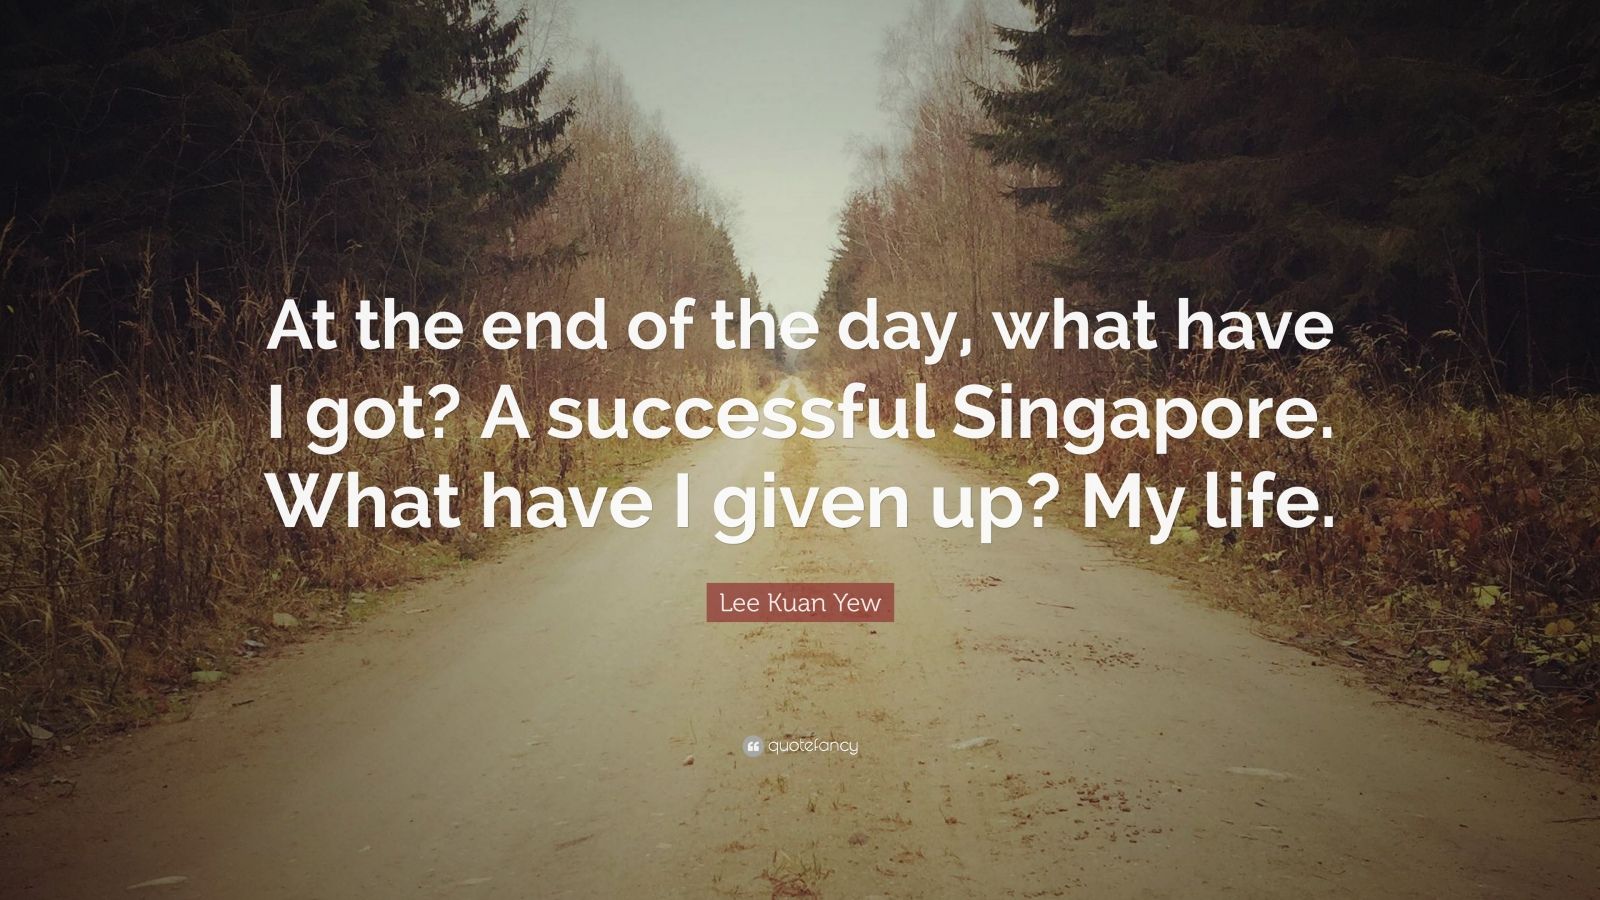 Lee Kuan Yew Quote: “At the end of the day, what have I got? A